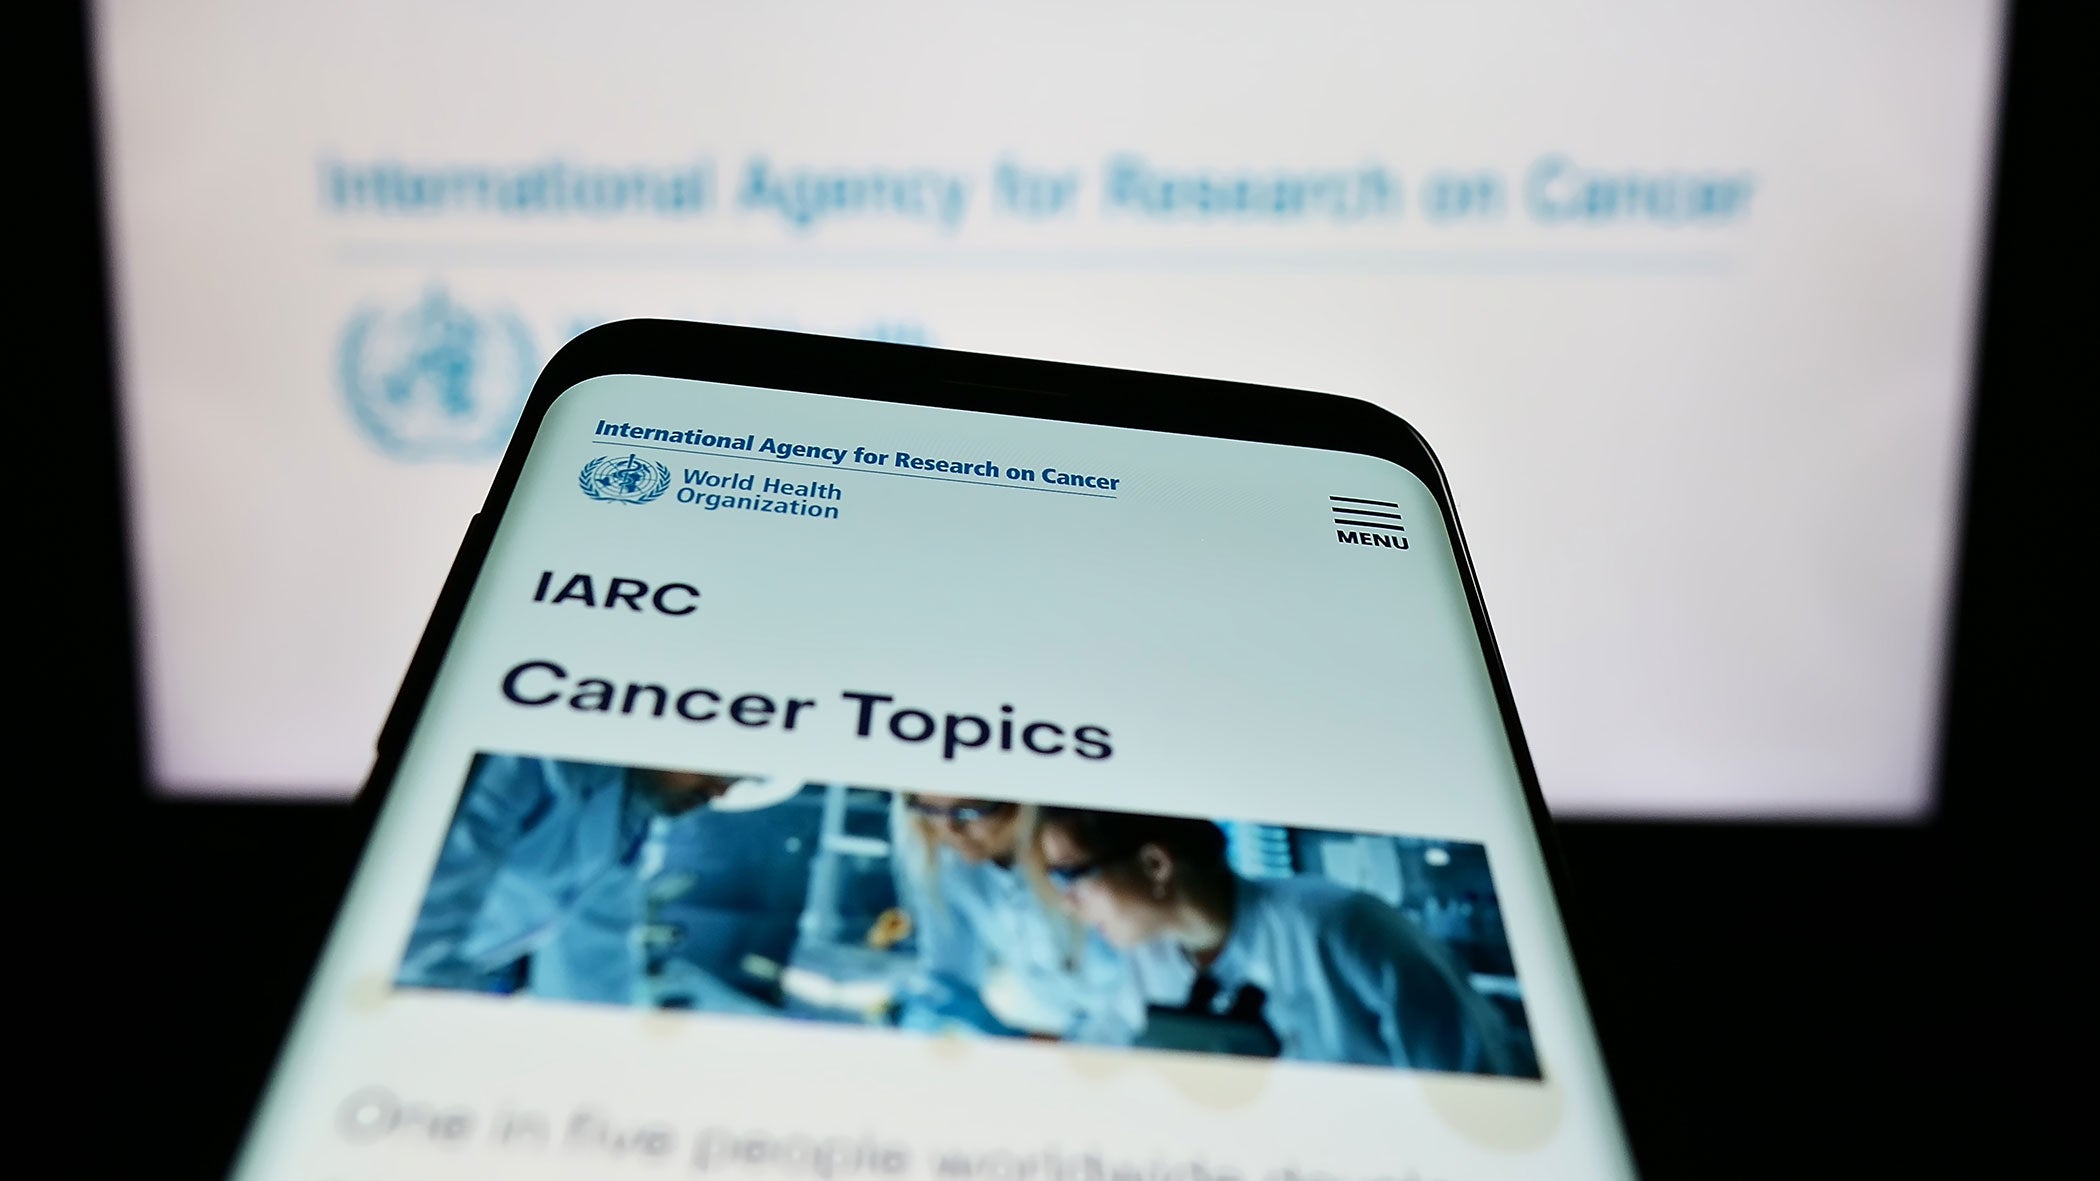 IARC – INTERNATIONAL AGENCY FOR RESEARCH ON CANCER